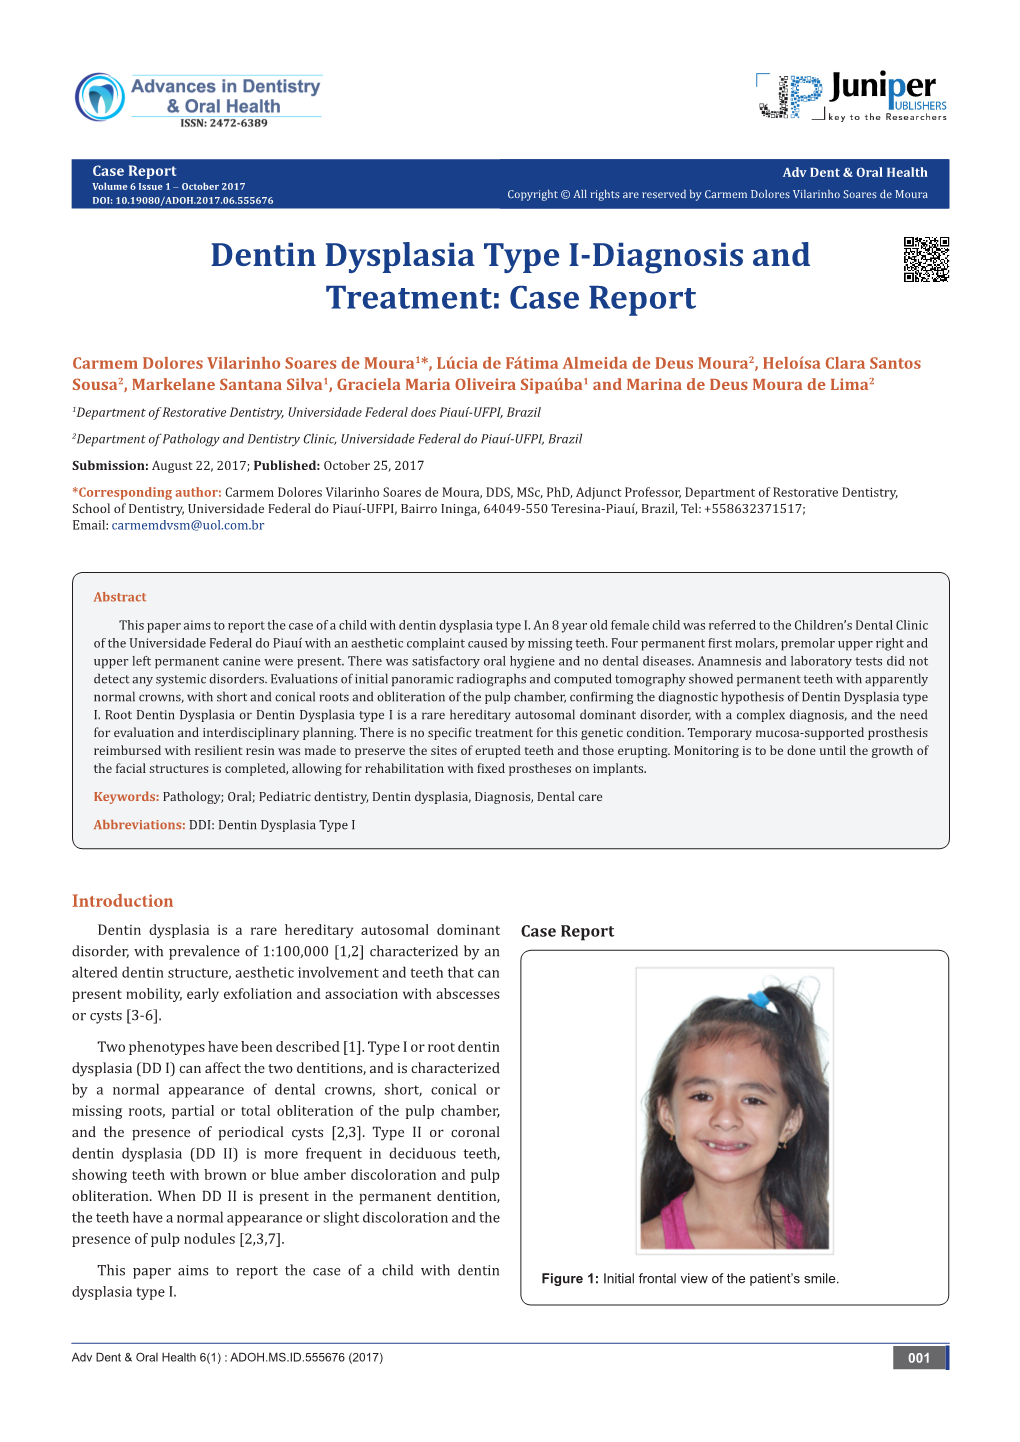 Dentin Dysplasia Type I-Diagnosis and Treatment: Case Report